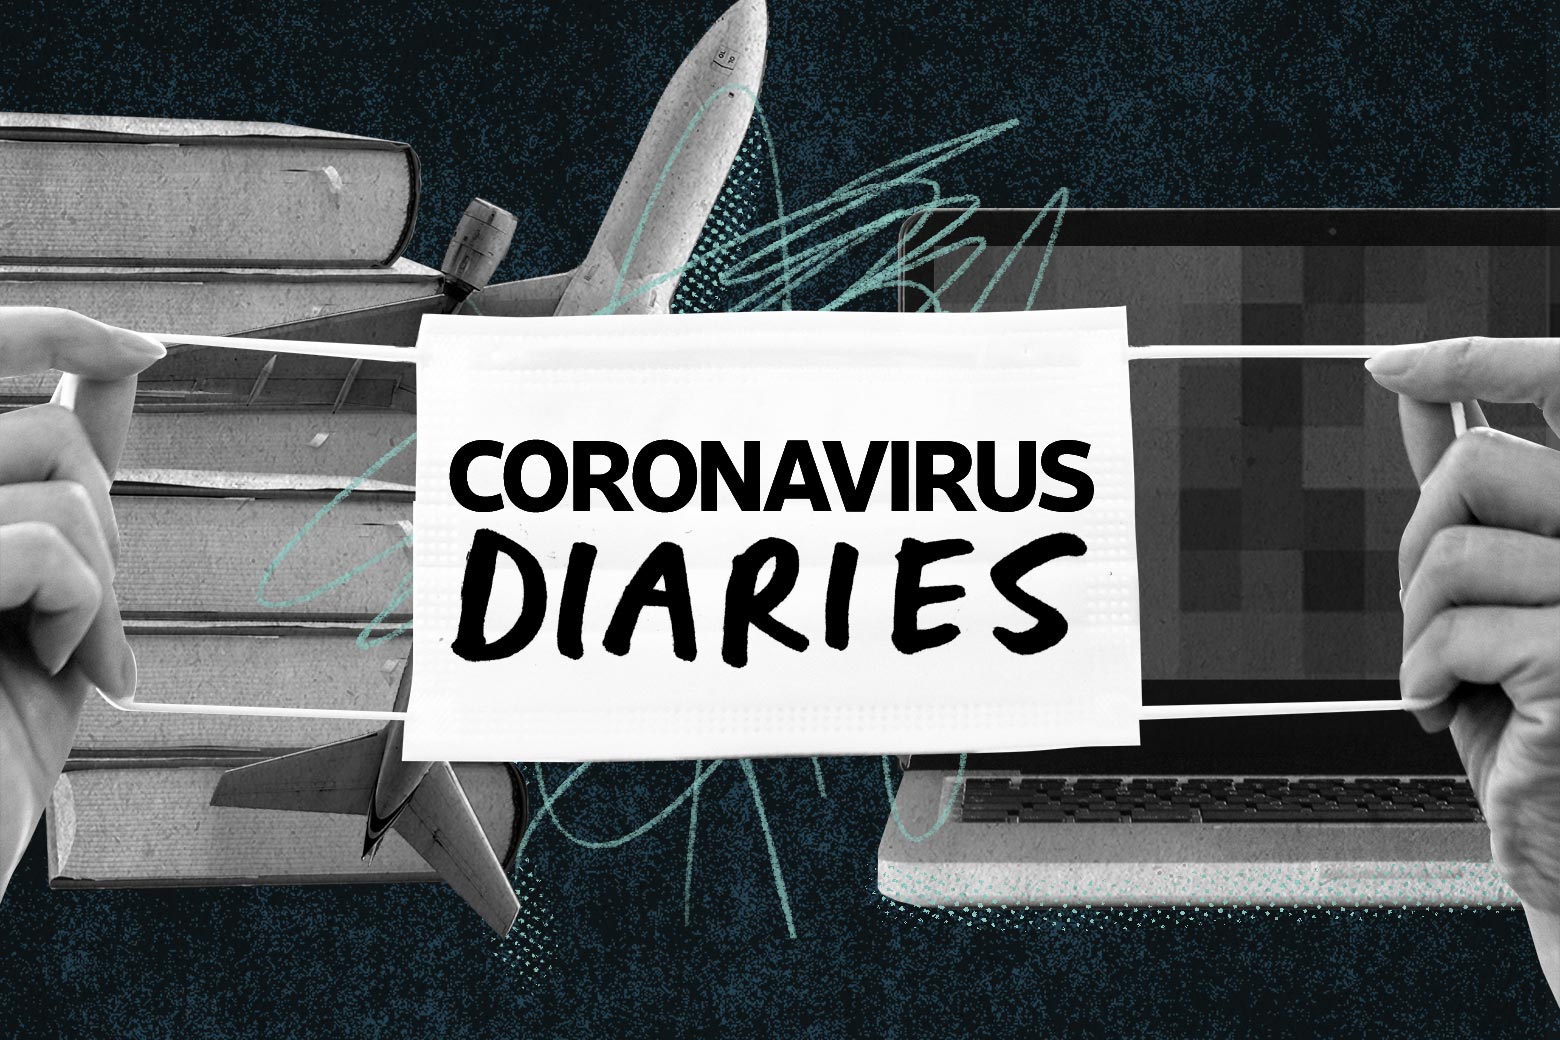 Amazon boxes, a plane, and a laptop with a blurred out screen behind a mask that says "Coronavirus Diaries."